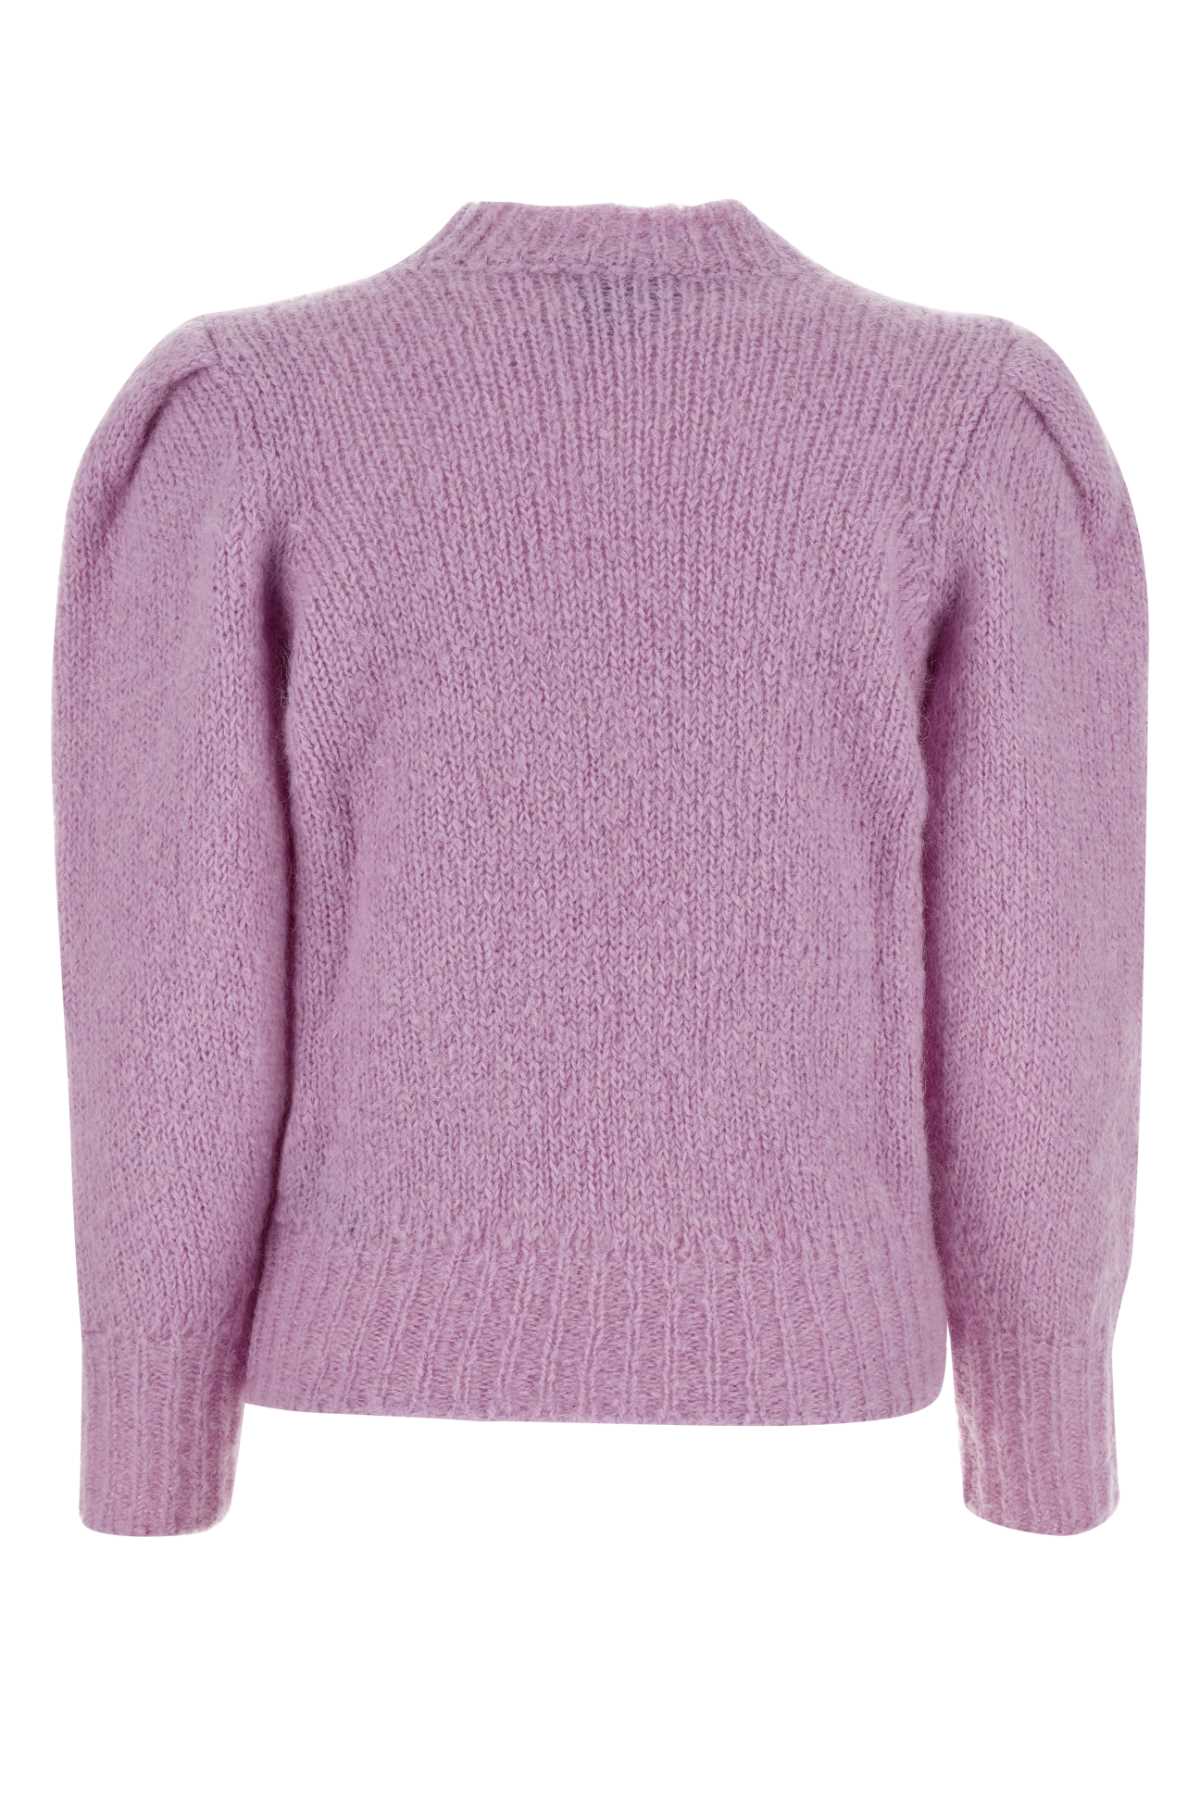 Isabel Marant Lilac Mohair Blend Emma Sweater